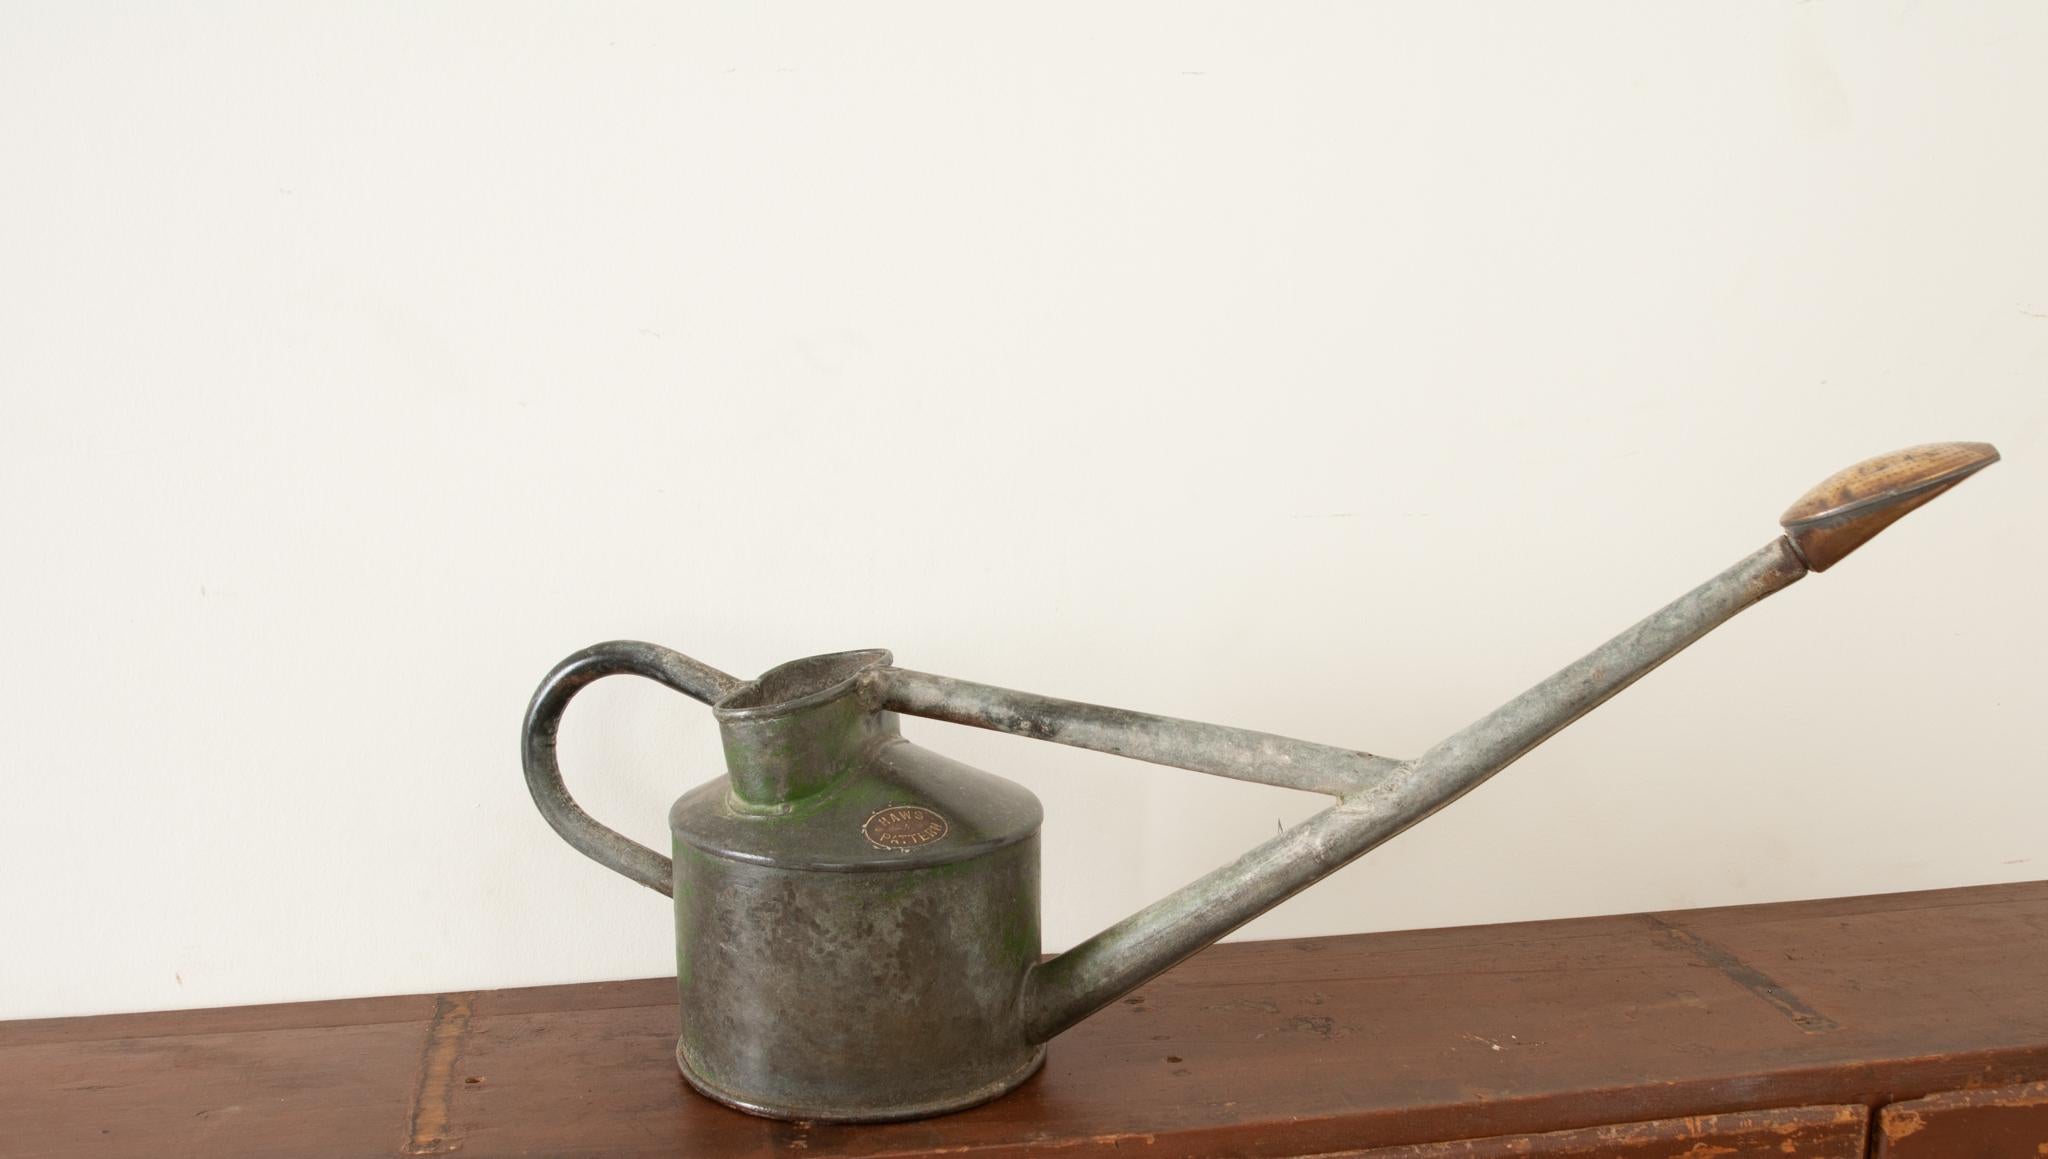 This whimsical English garden antique is just as functional as it is decorative. Crafted from zinc with accents of brass- the whole has gained a great patina. The length of the spout and position of the handle are specifically designed to avoid